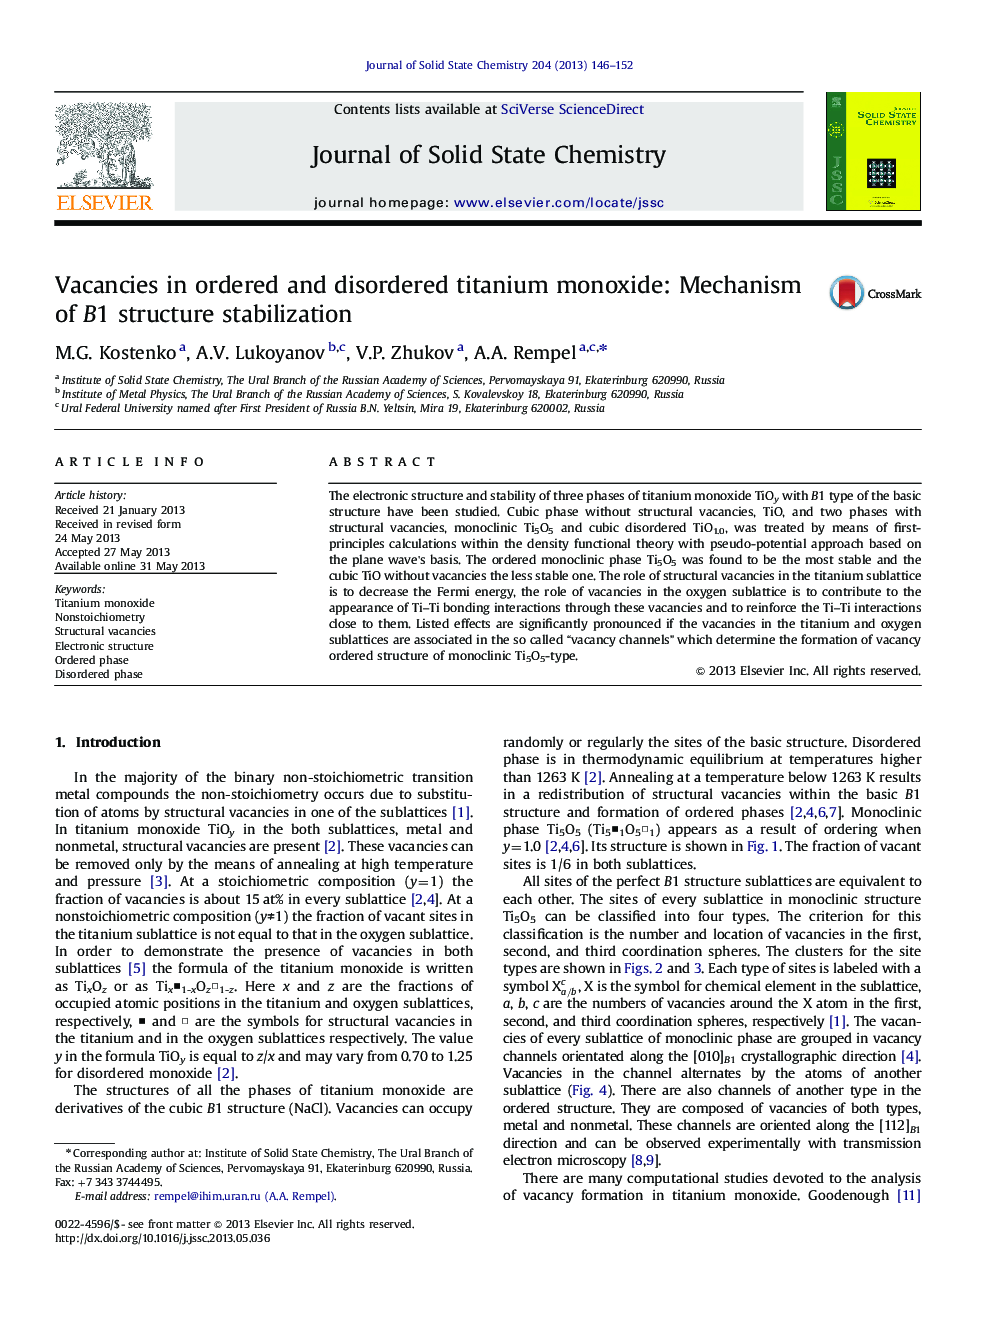 Vacancies in ordered and disordered titanium monoxide: Mechanism of B1 structure stabilization